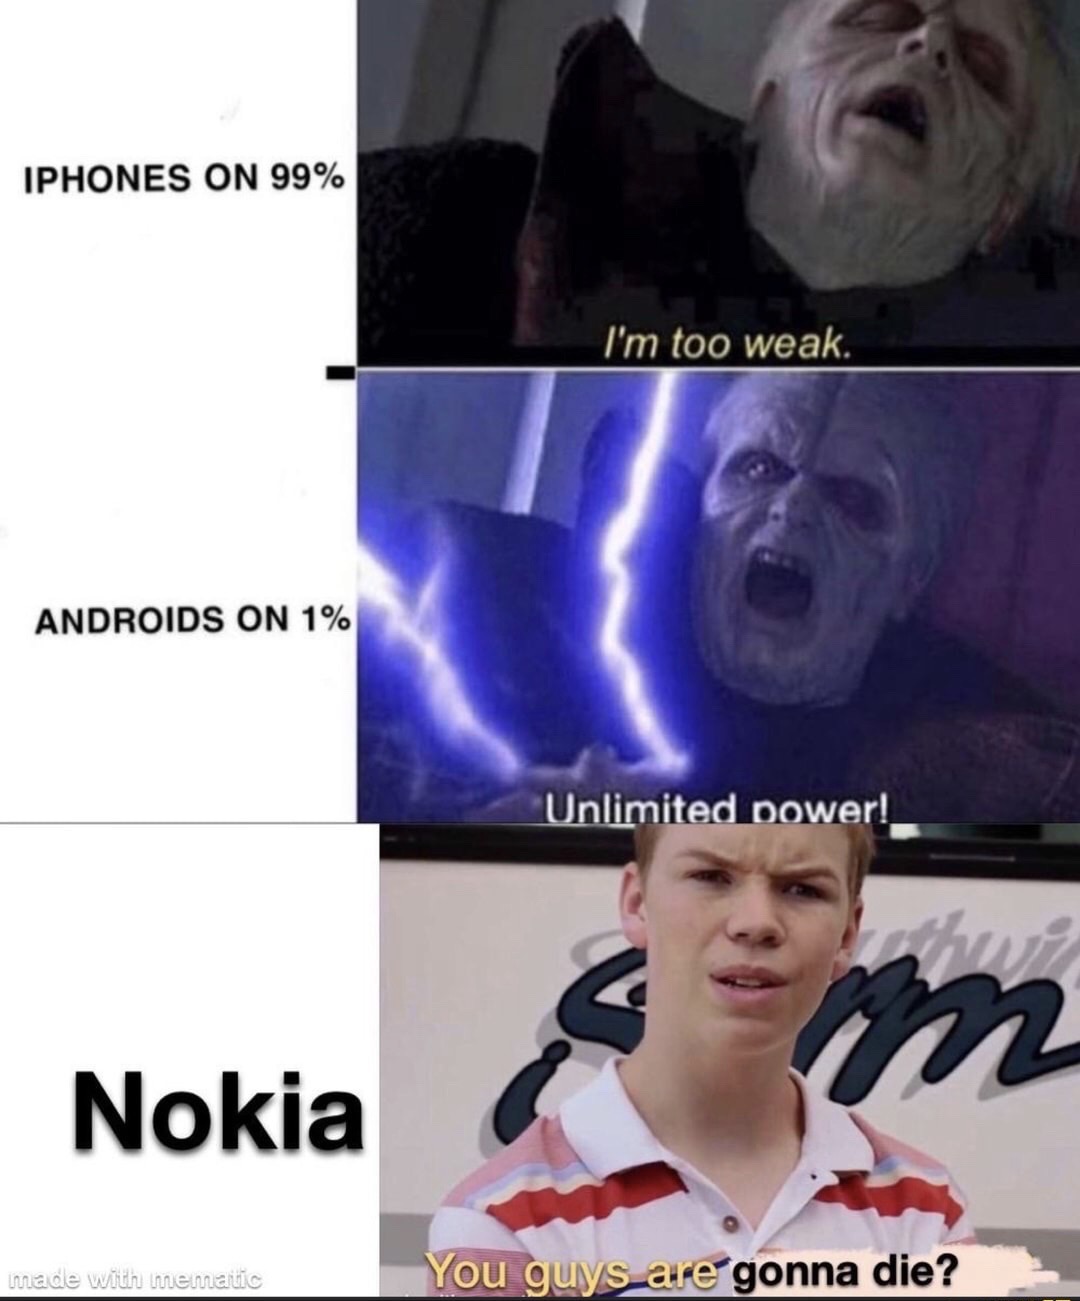 never listen to rap again meme - Iphones On 99% I'm too weak. Androids On 1% Unlimited power! Nokia made with mematic You guys are gonna die?